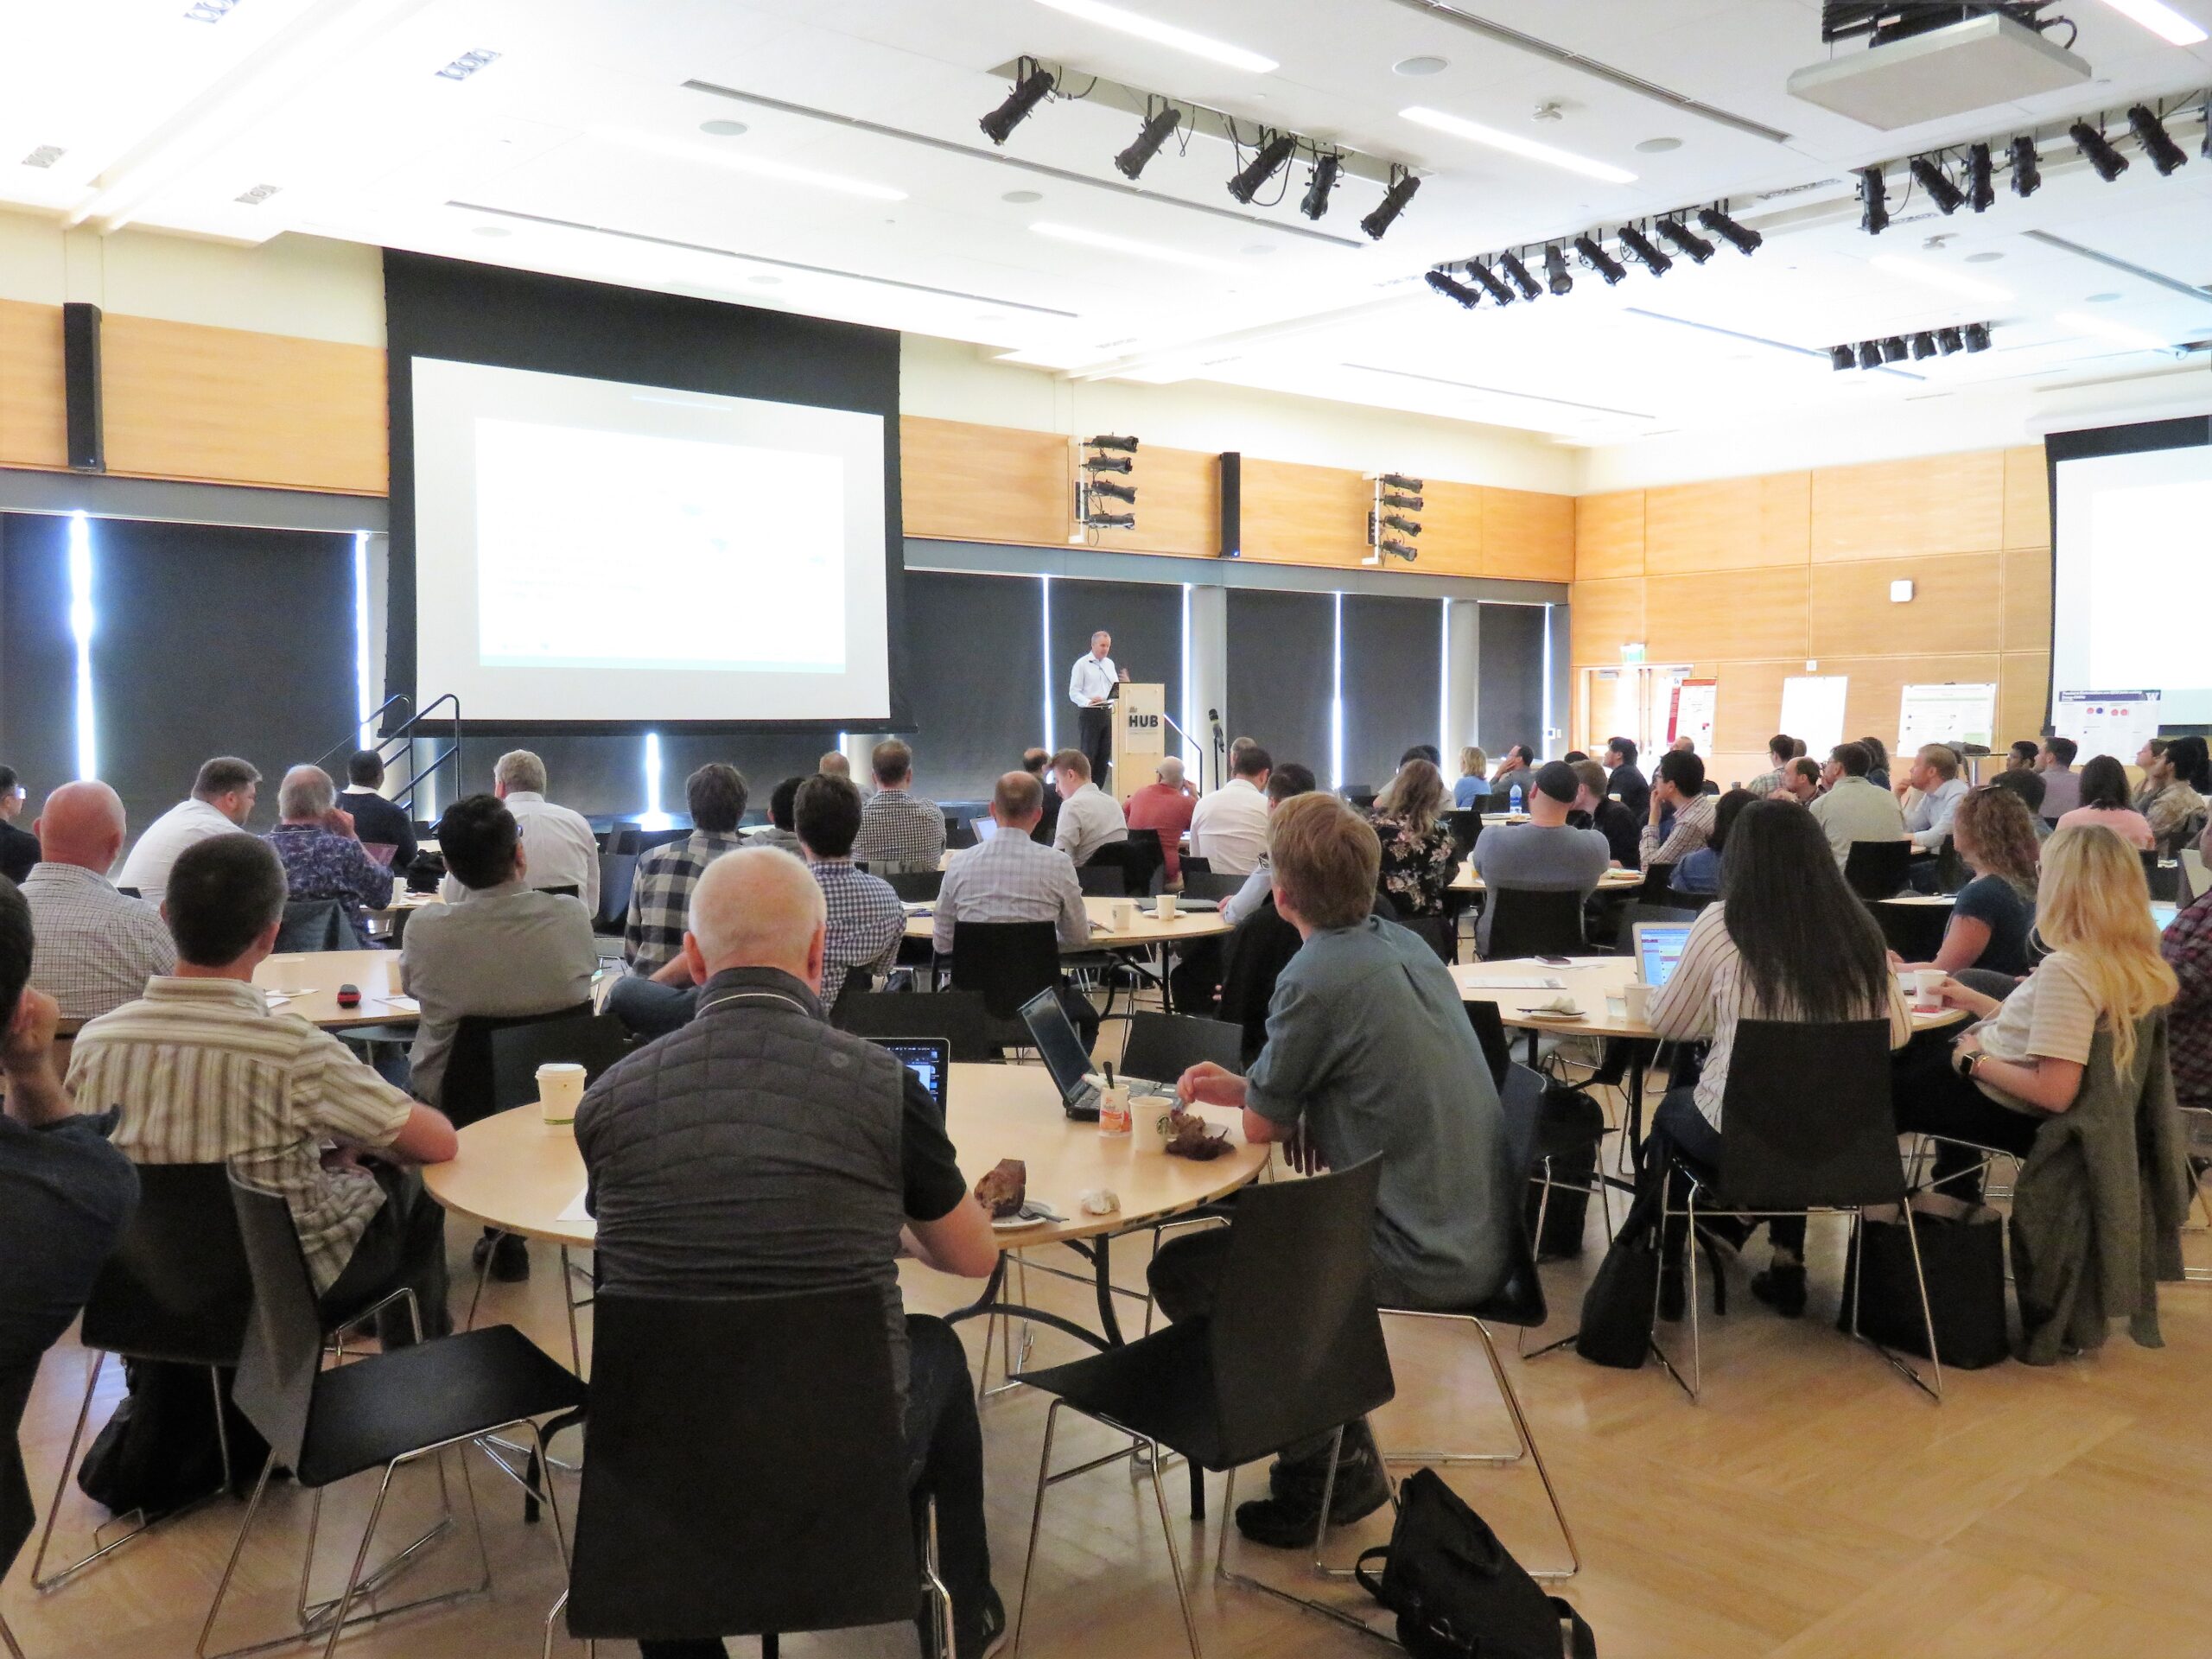 Participants of the 2019 Northwest Data Science Summit.